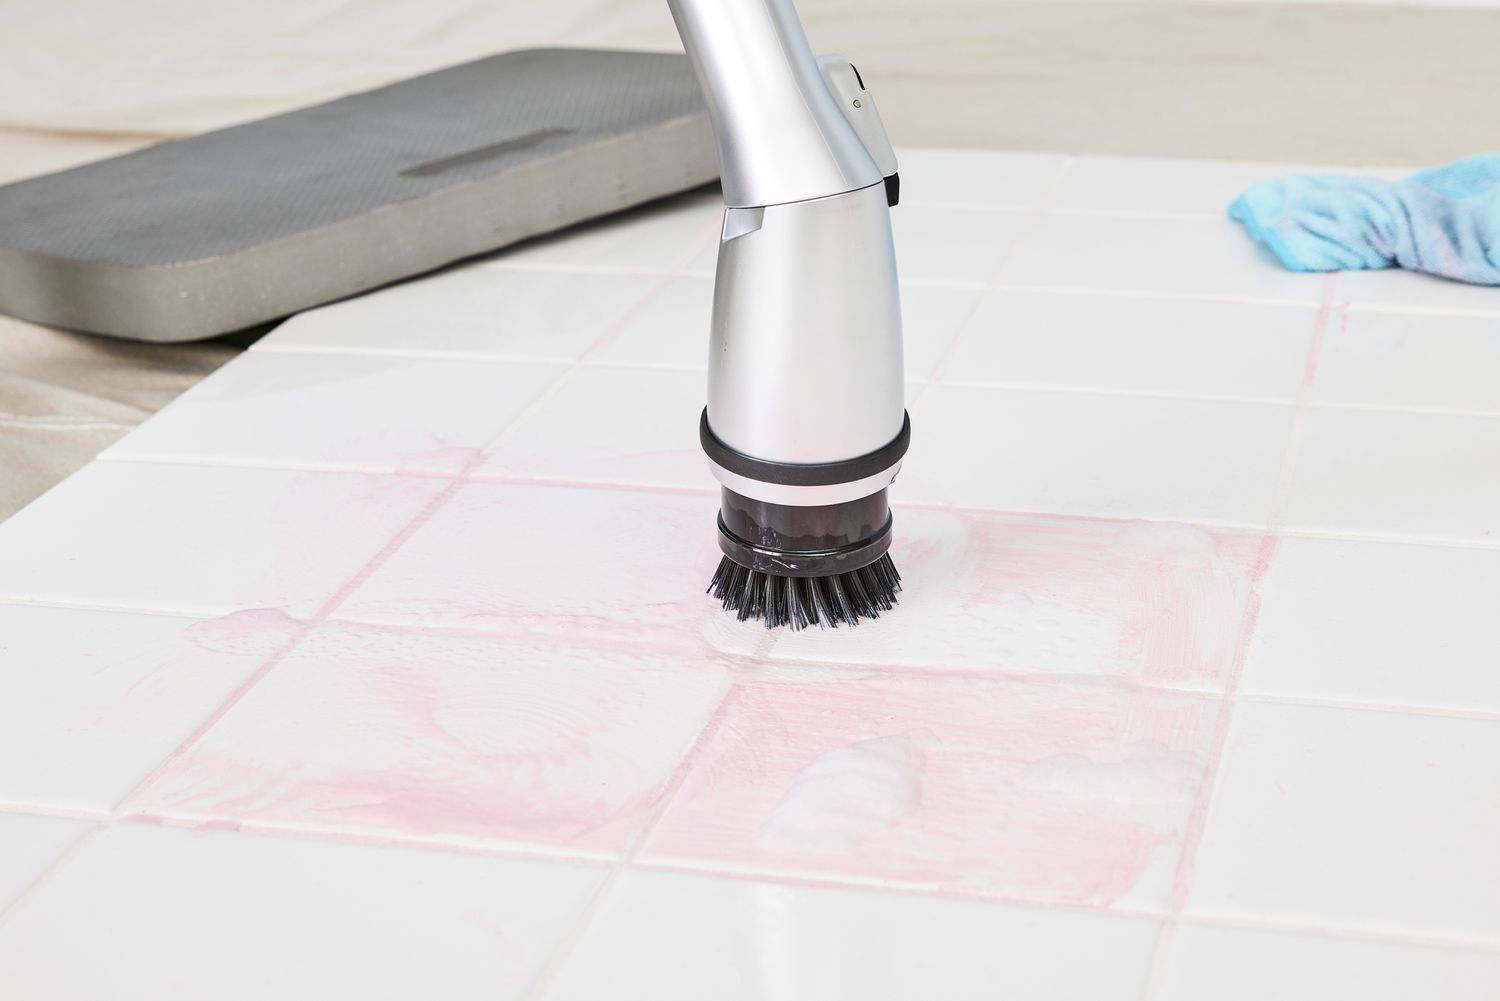 A HattyRoom Rechargeable Cordless Electric Spin Scrubber cleans white tile